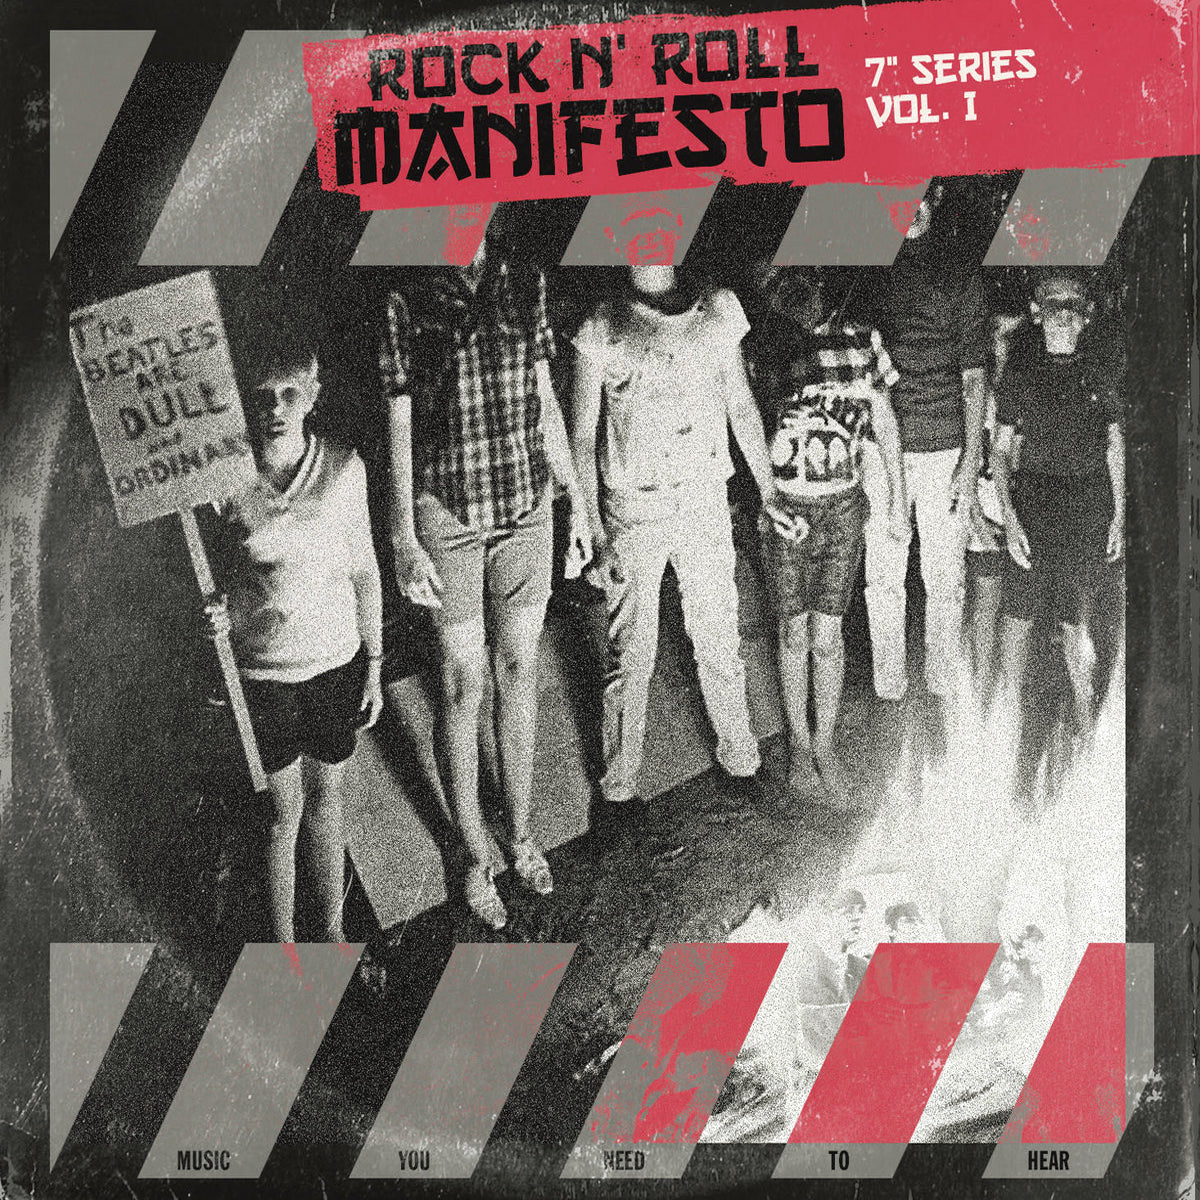 V/A- Rock 'n Roll Manifesto 7" Series Vol. 1 7" ~W/ TIGER TOUCH, MISSILE STUDS!